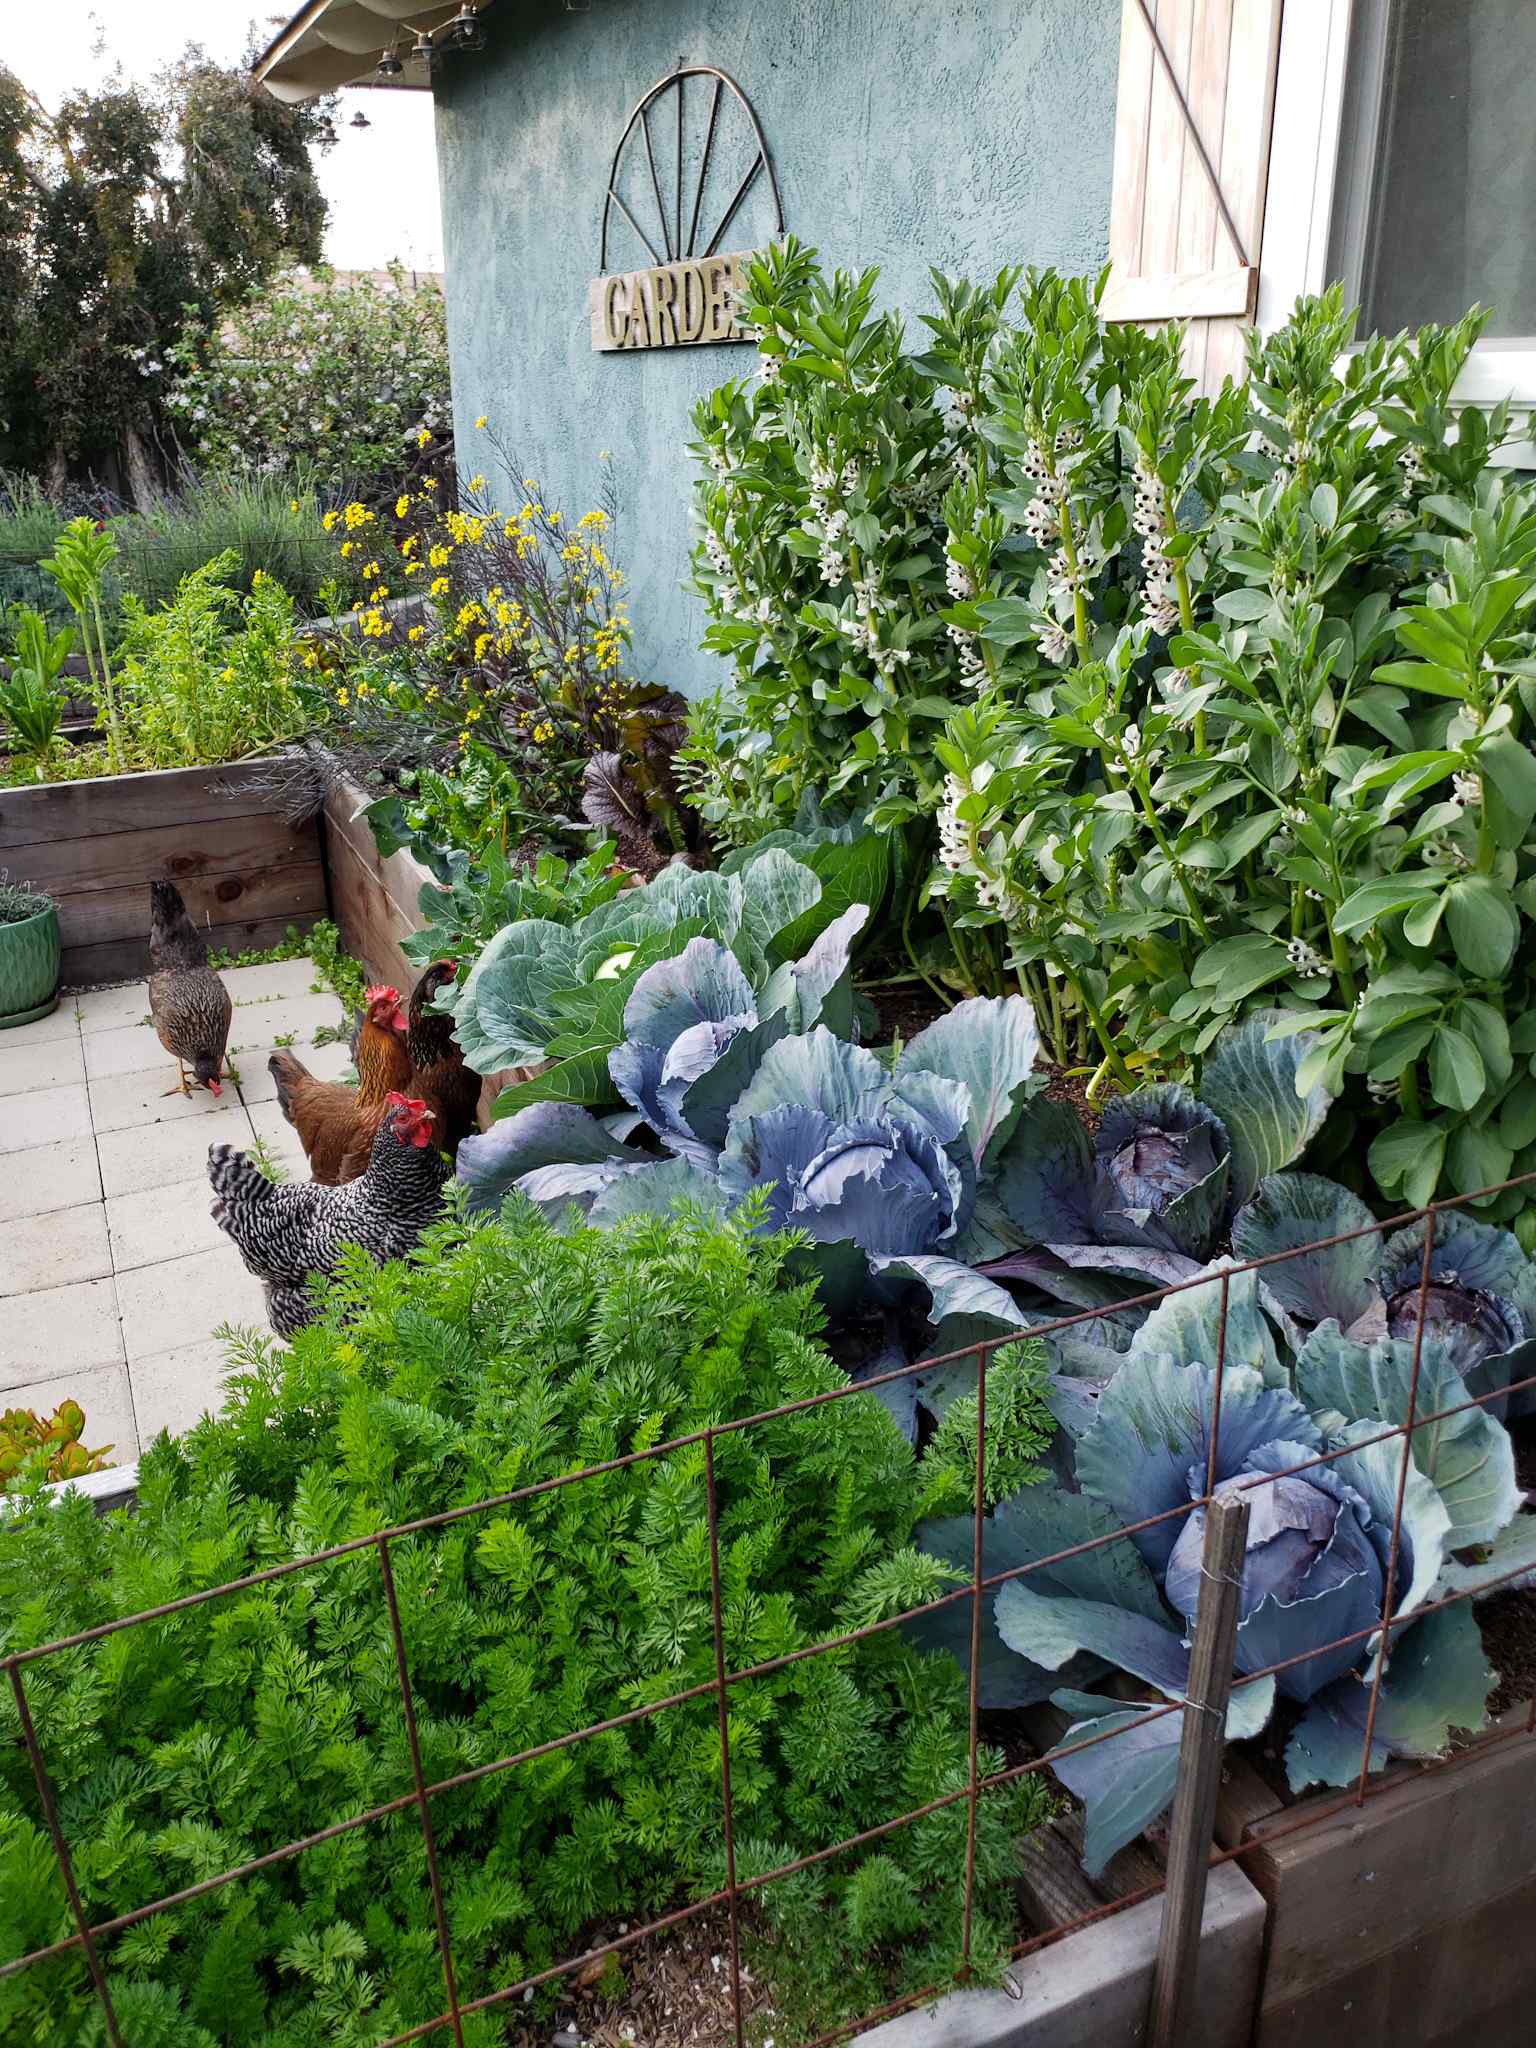 A u-shaped garden bed next to the side of a house is lush with growing greens, brassicas, and legumes. There are mature red cabbage heads, carrot greens, mustard greens, and asian greens. Behind the red cabbage there are many flowering fava bean plants shooting upwards towards the sky. They come up to the bottom of a window in the image. There are four curious chickens at the foot of the beds, looking upwards at the vegetables that they may be able to consume. There is a sign of the house that says "garden" and there are various trees and pollinator perennials beyond the edge of the house. 